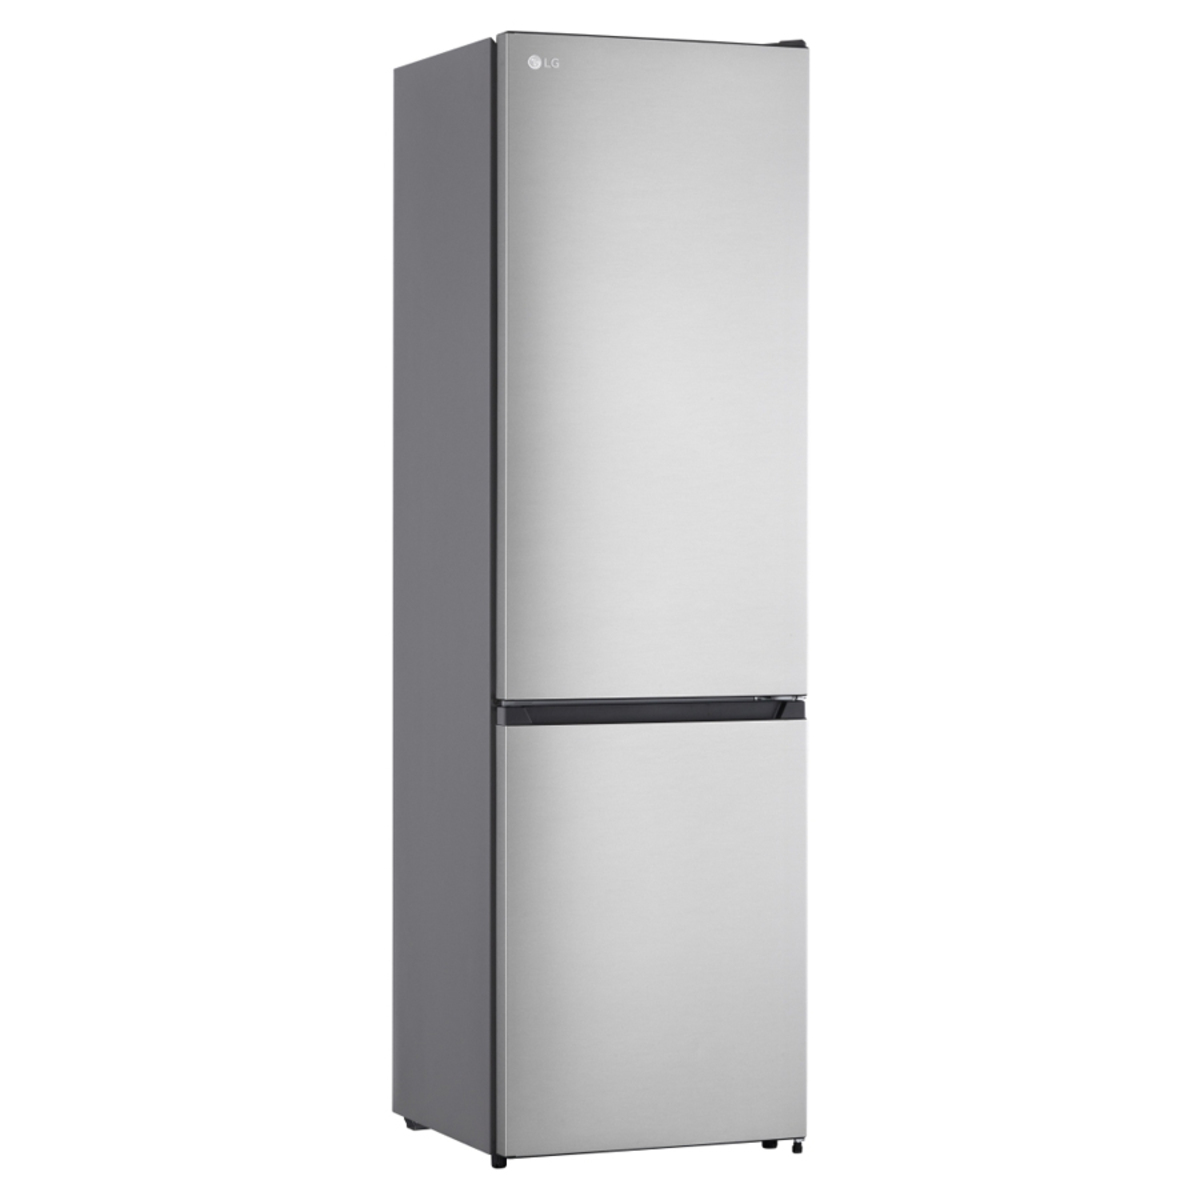 LG GBM22HSADH D Rated 336L Total no Frost Fridge Freezer, Silver